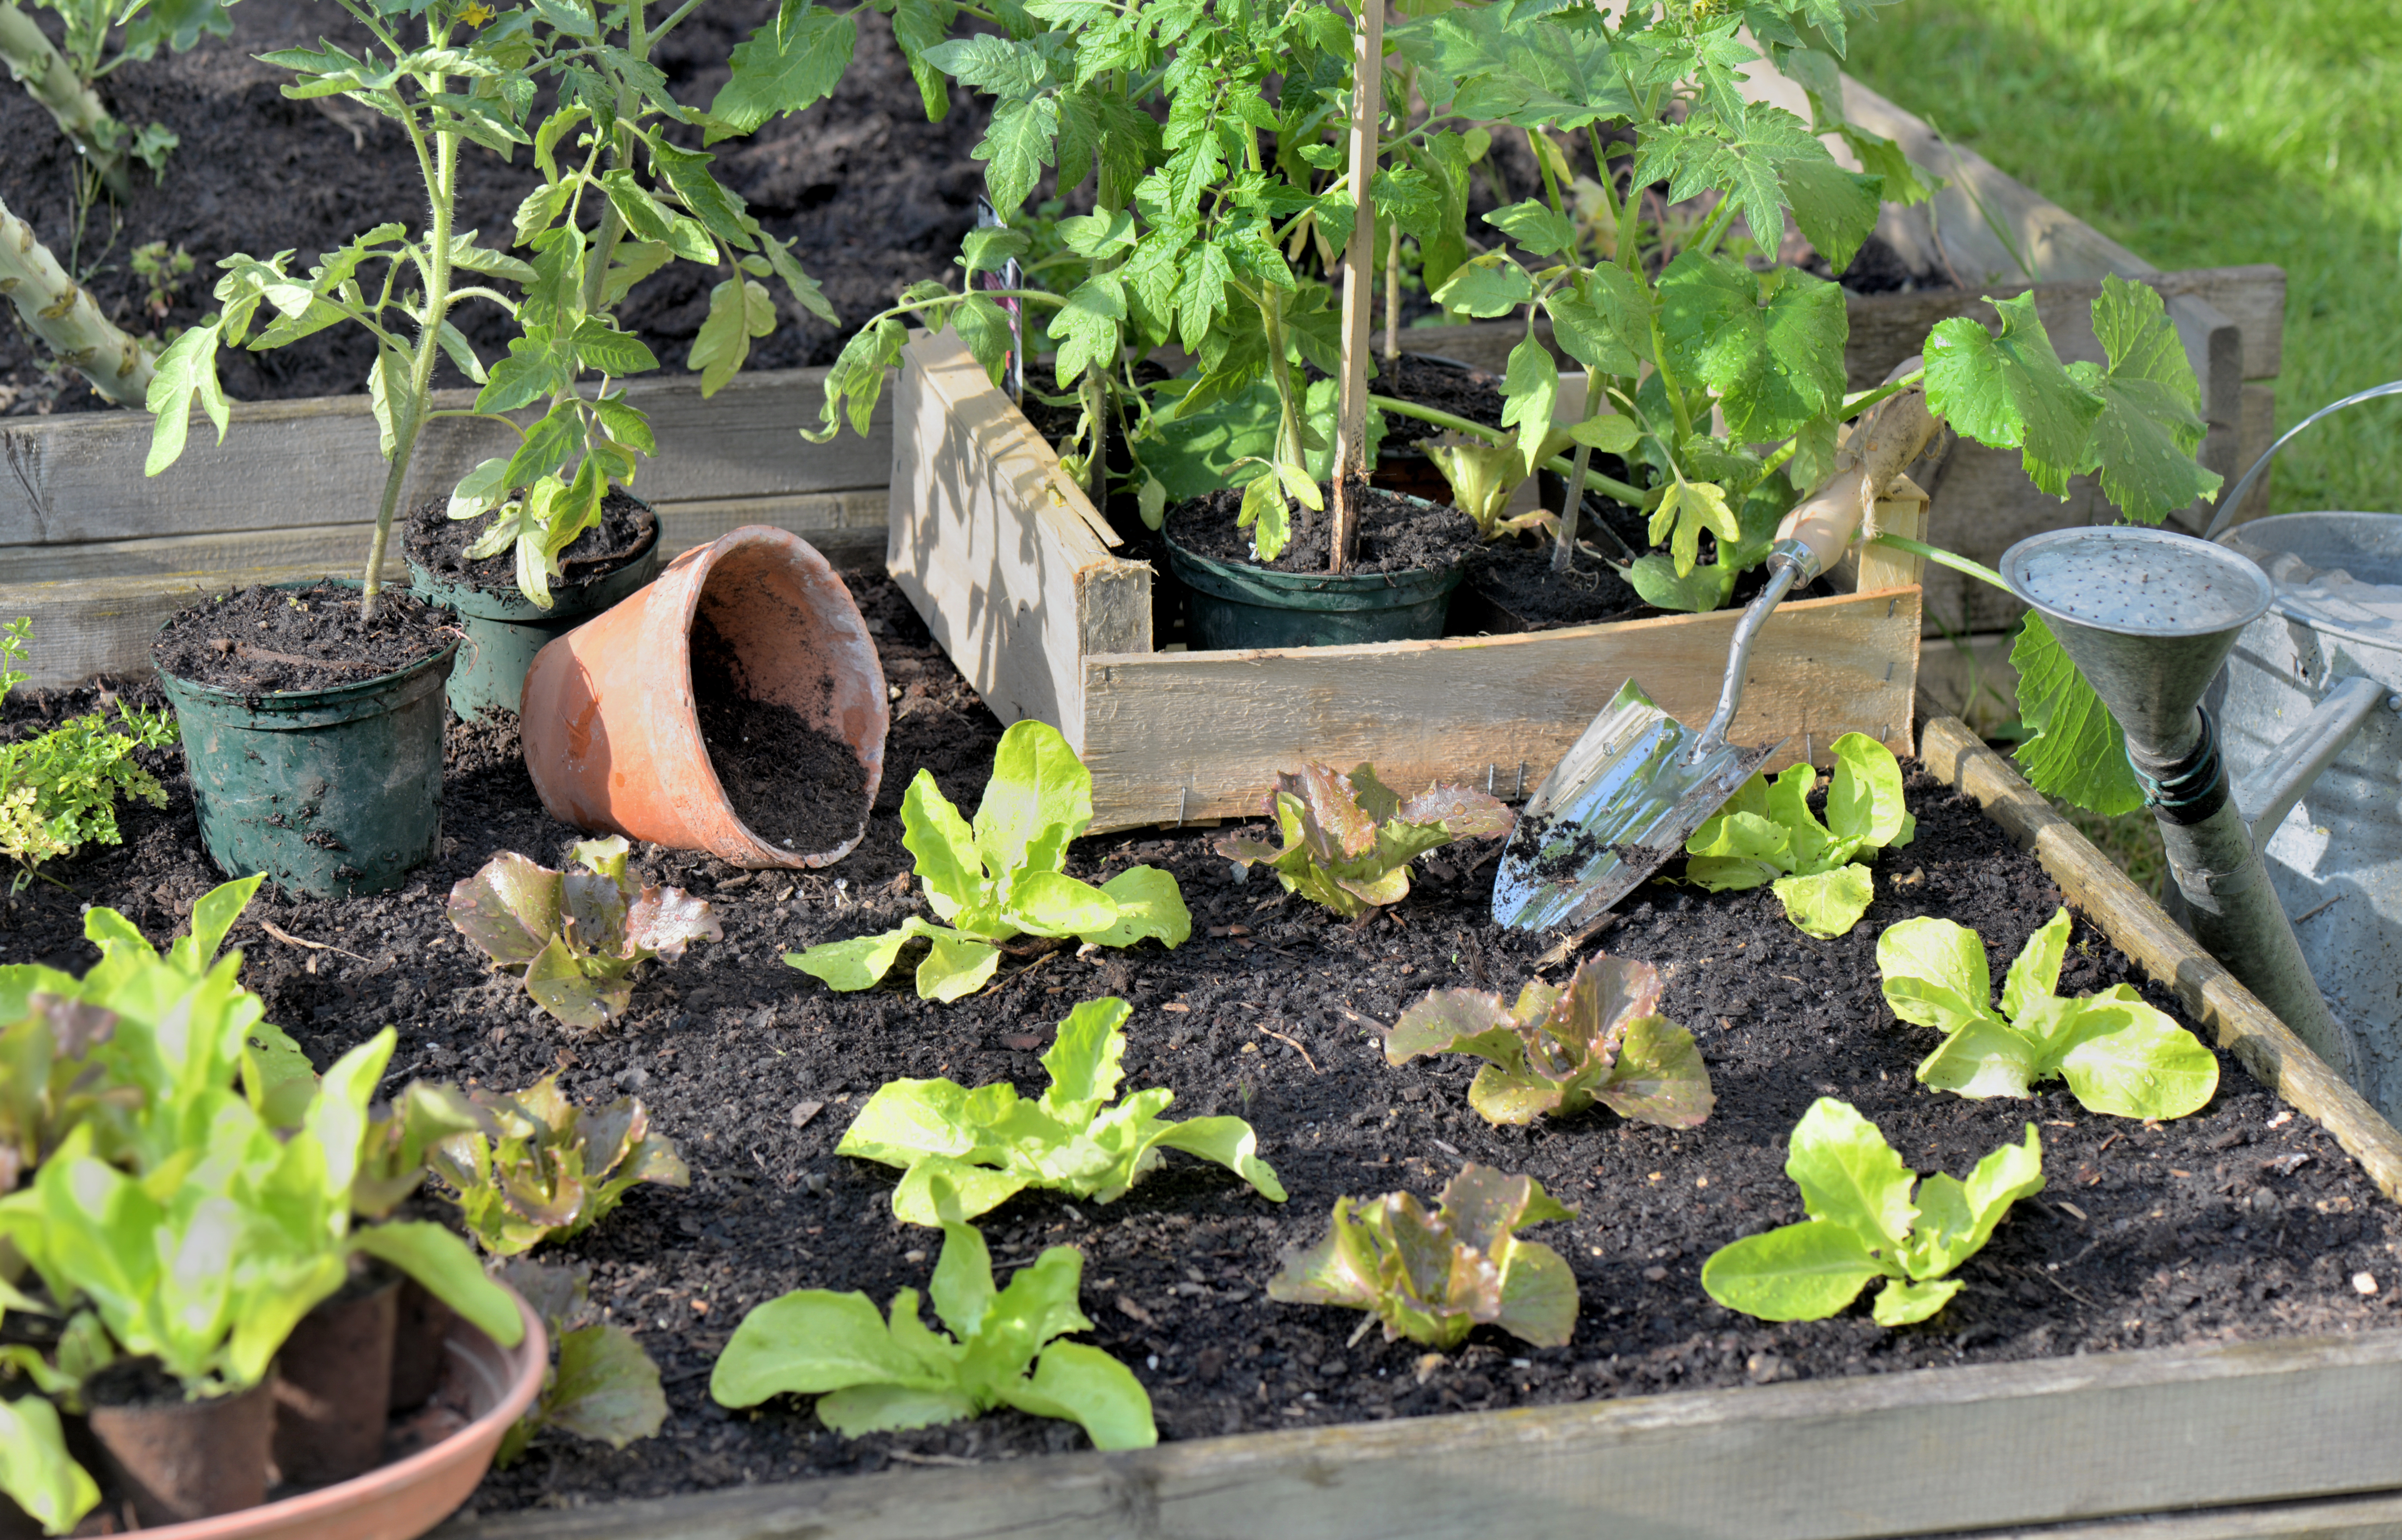 Lettuce and tomato transplants in raised beds surrounded by pots, a trowel, and a watering can